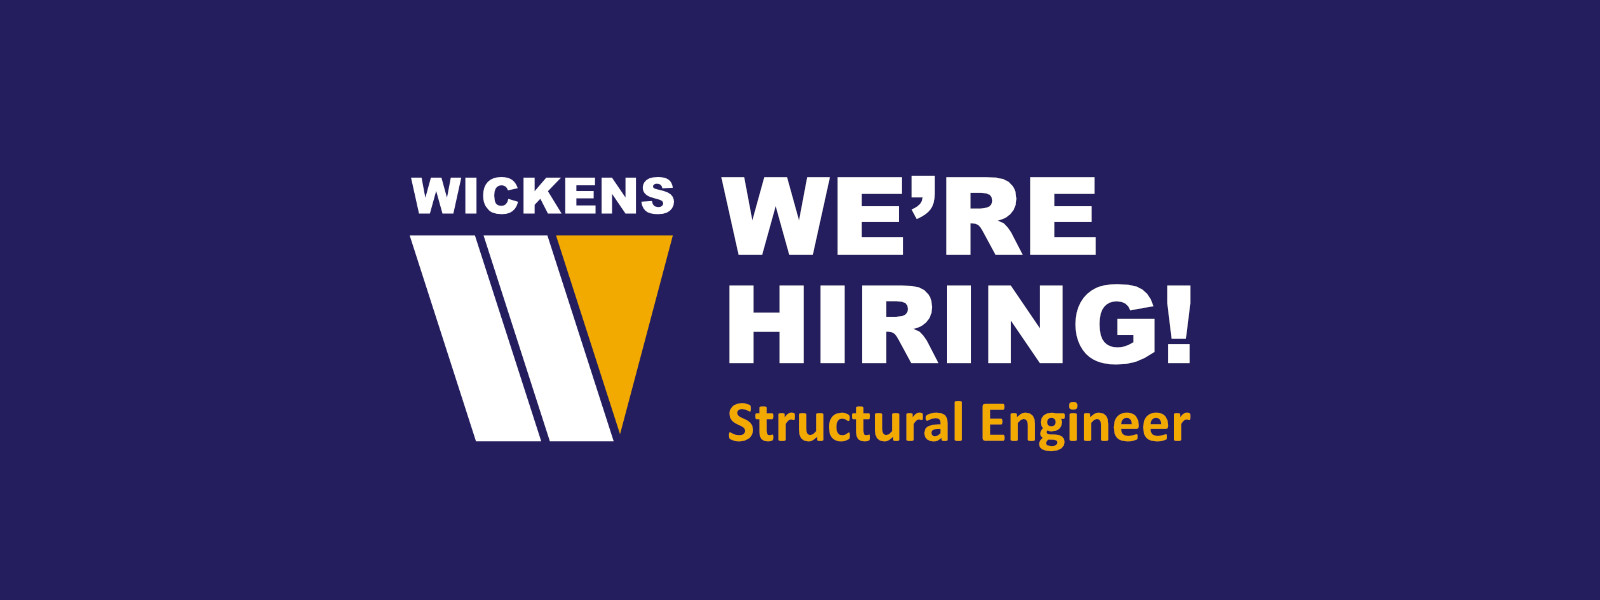 We're looking for a Structural Engineer!